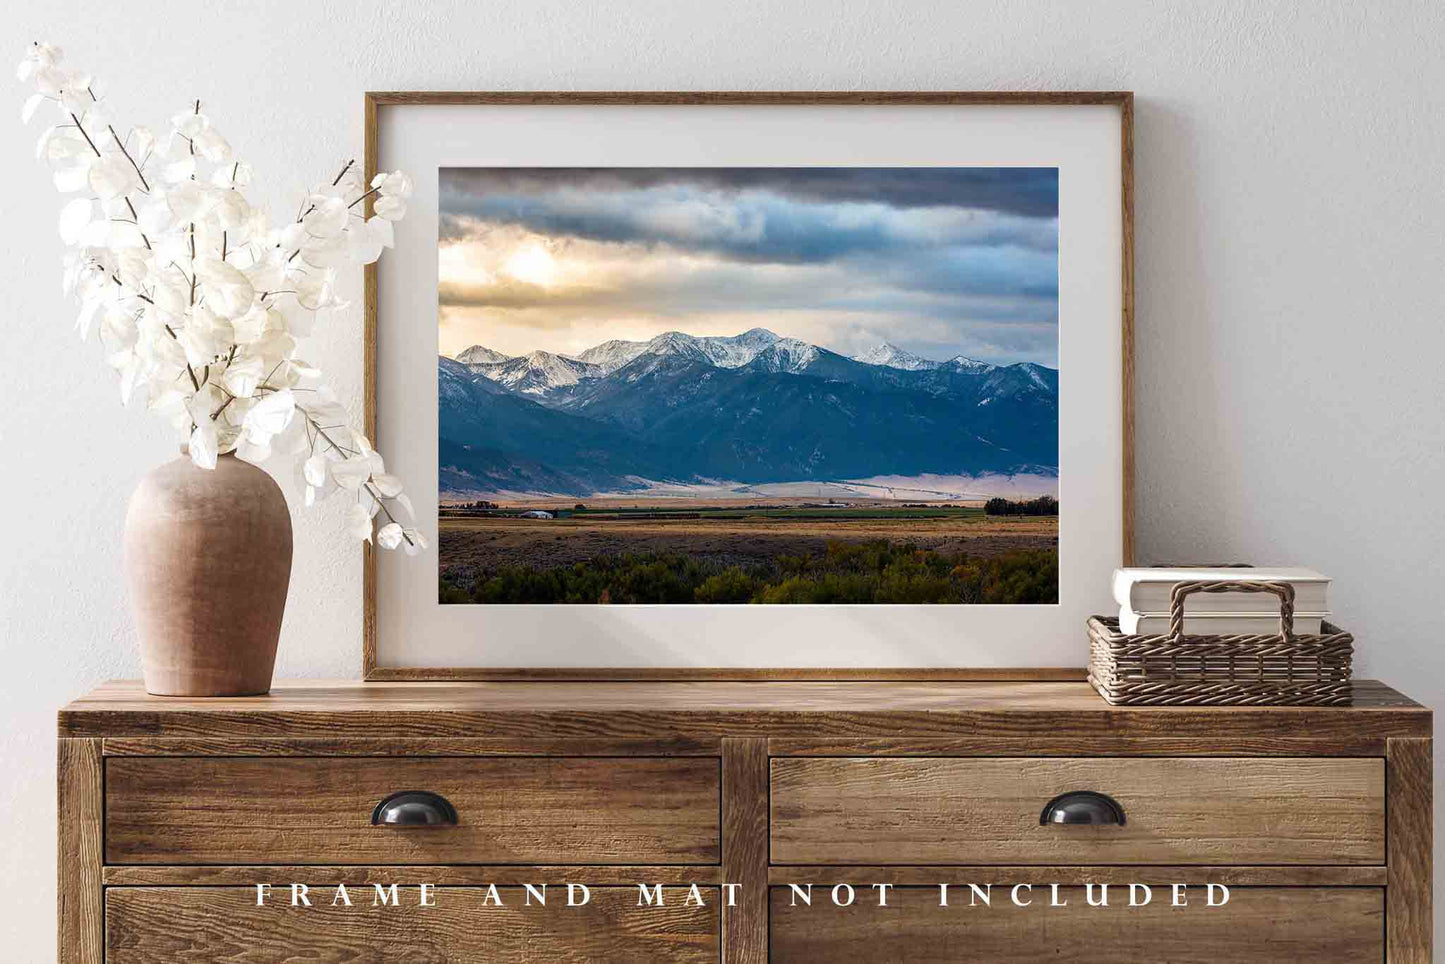 Western Wall Art - Picture of Rocky Mountains in Golden Sunlight in Montana - Landscape Photography Photo Print Artwork Decor